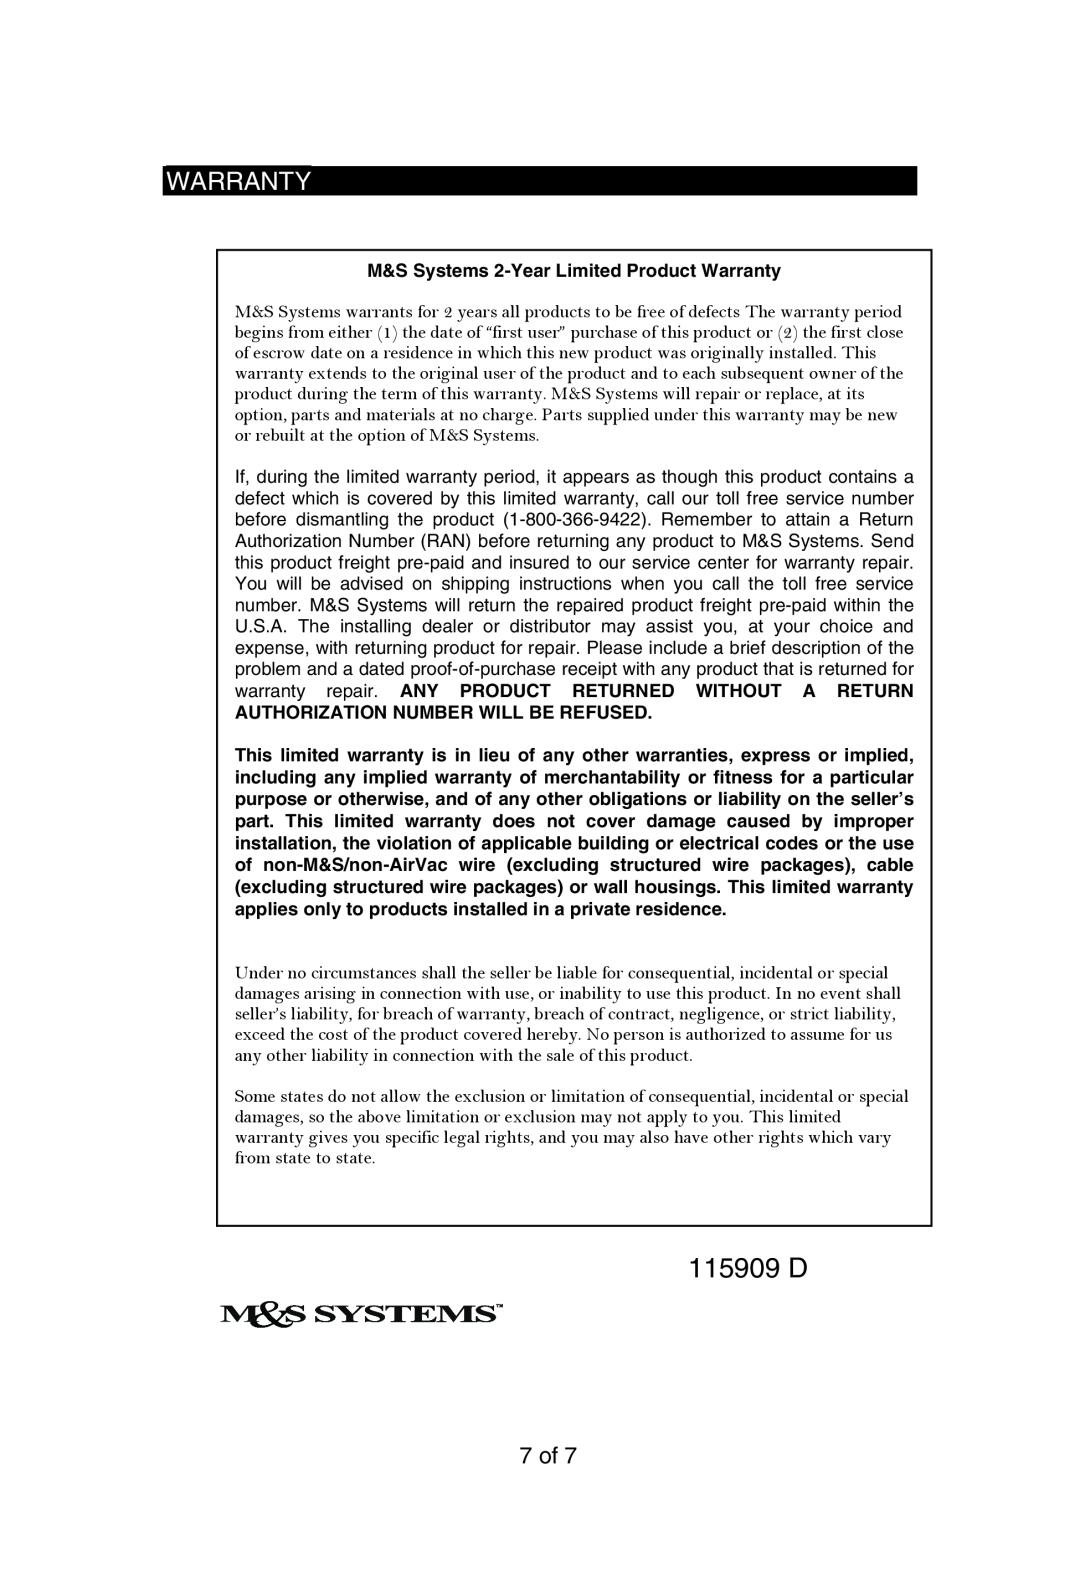 M&S Systems Home Theater System instruction manual 115909 D, M&S Systems 2-YearLimited Product Warranty 